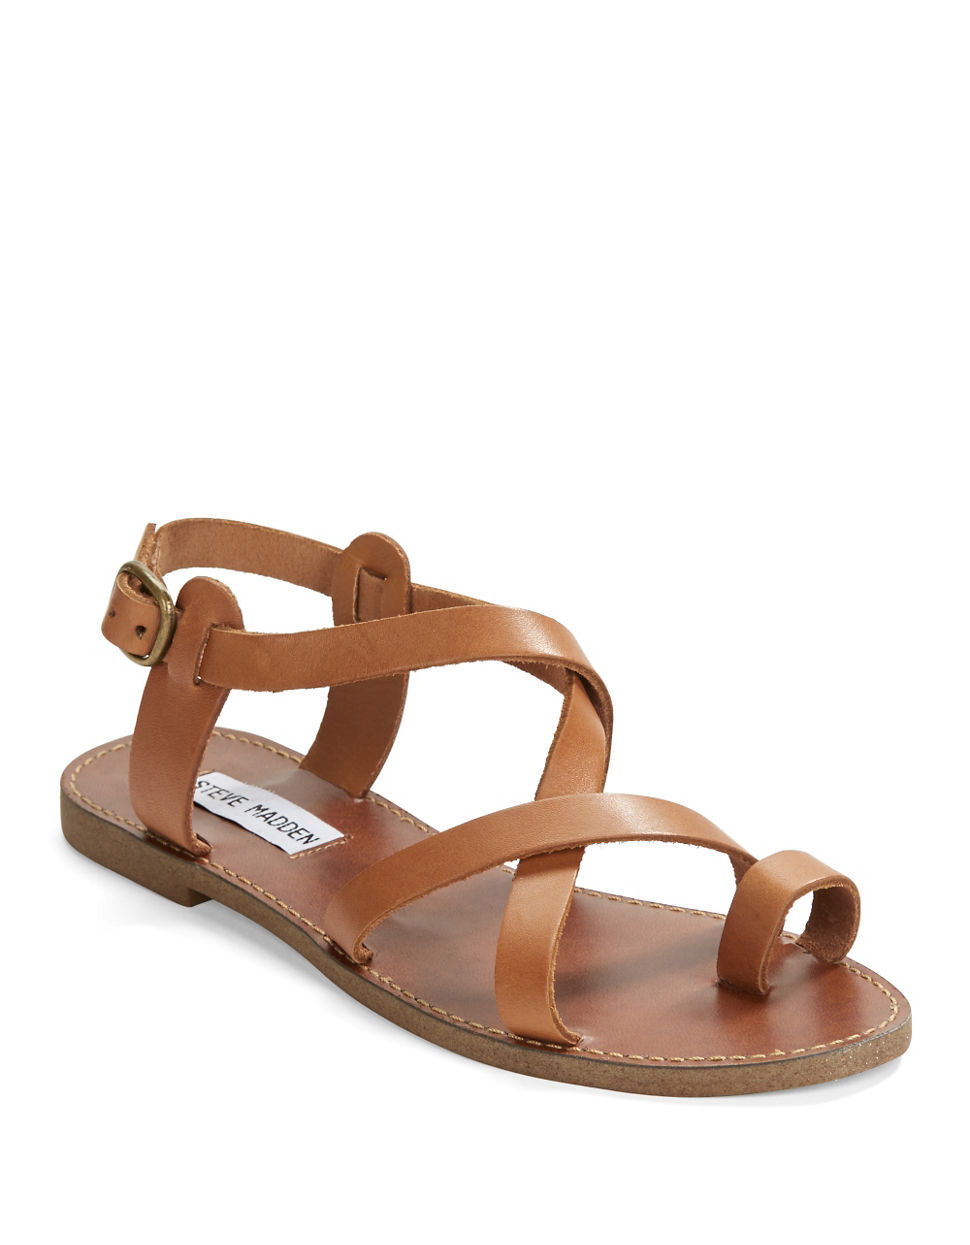 Steve Madden Agathist Leather Strappy Sandals In Brown Lyst 